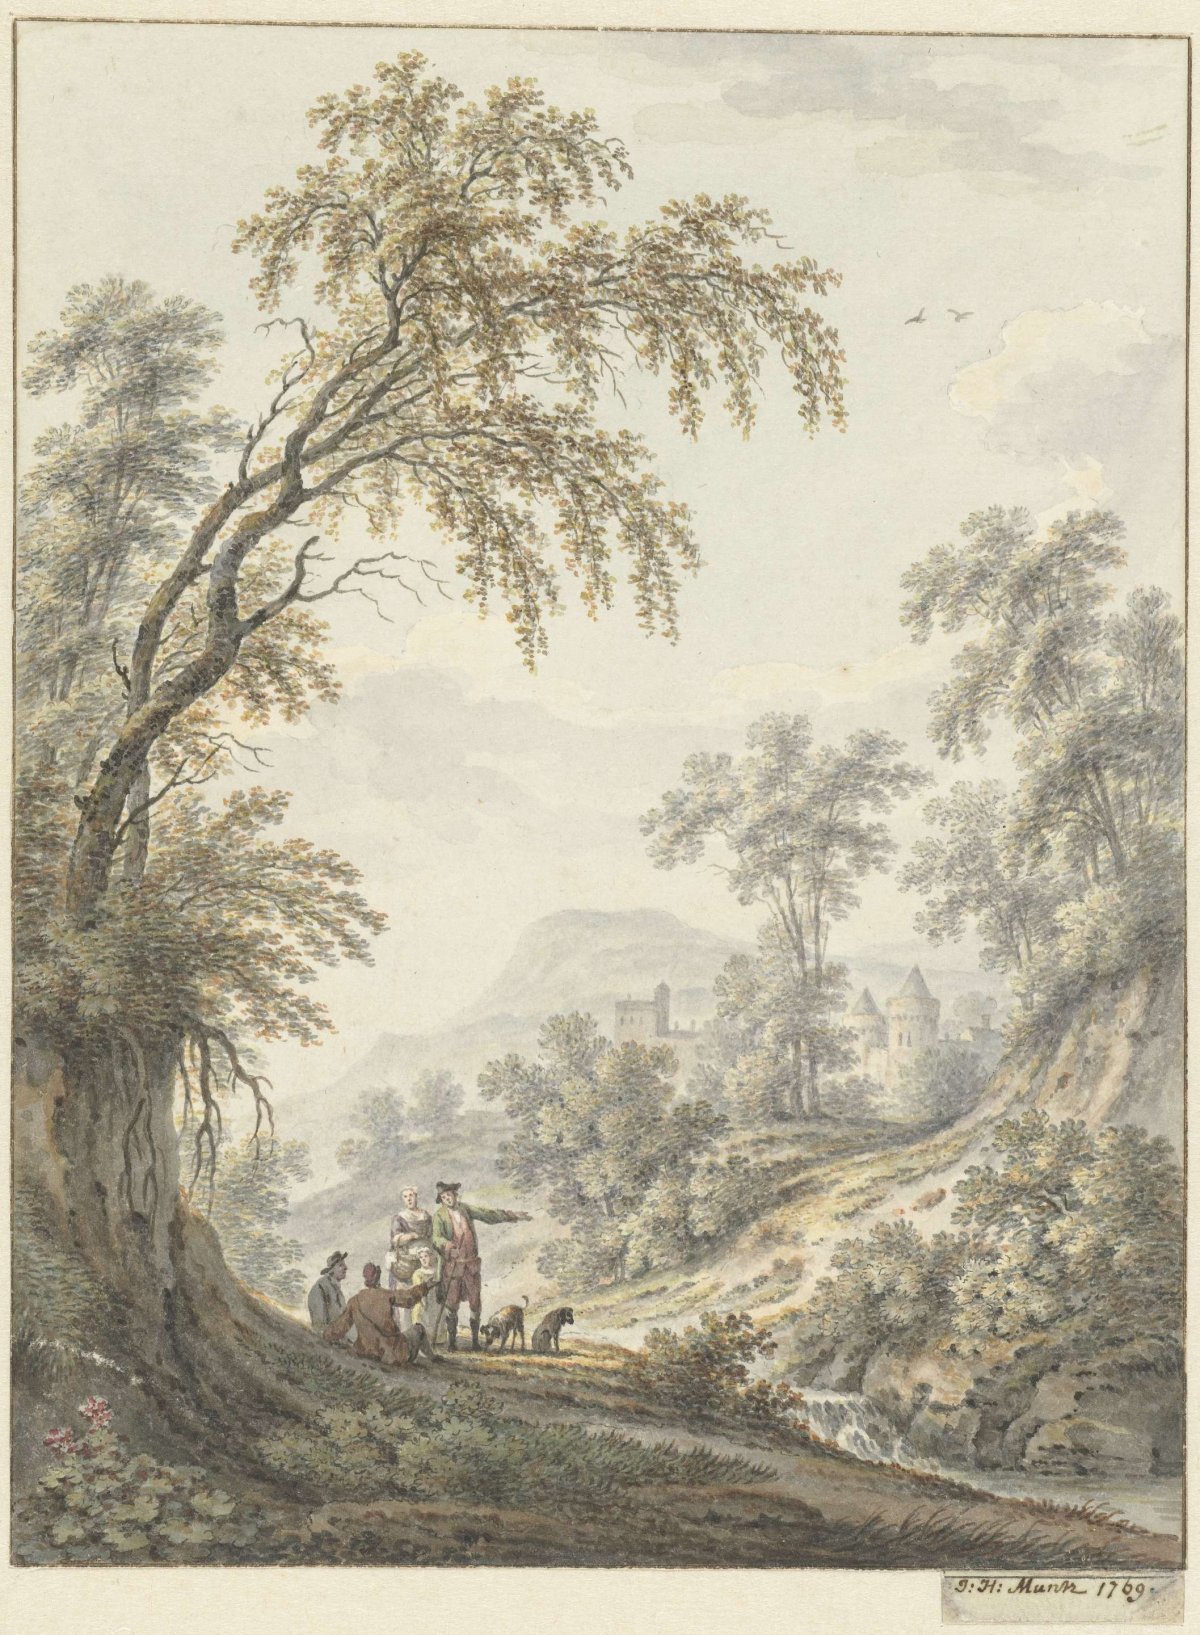 Landscape with waterfall and a castle in the distance, Johann Heinrich Müntz, 1769